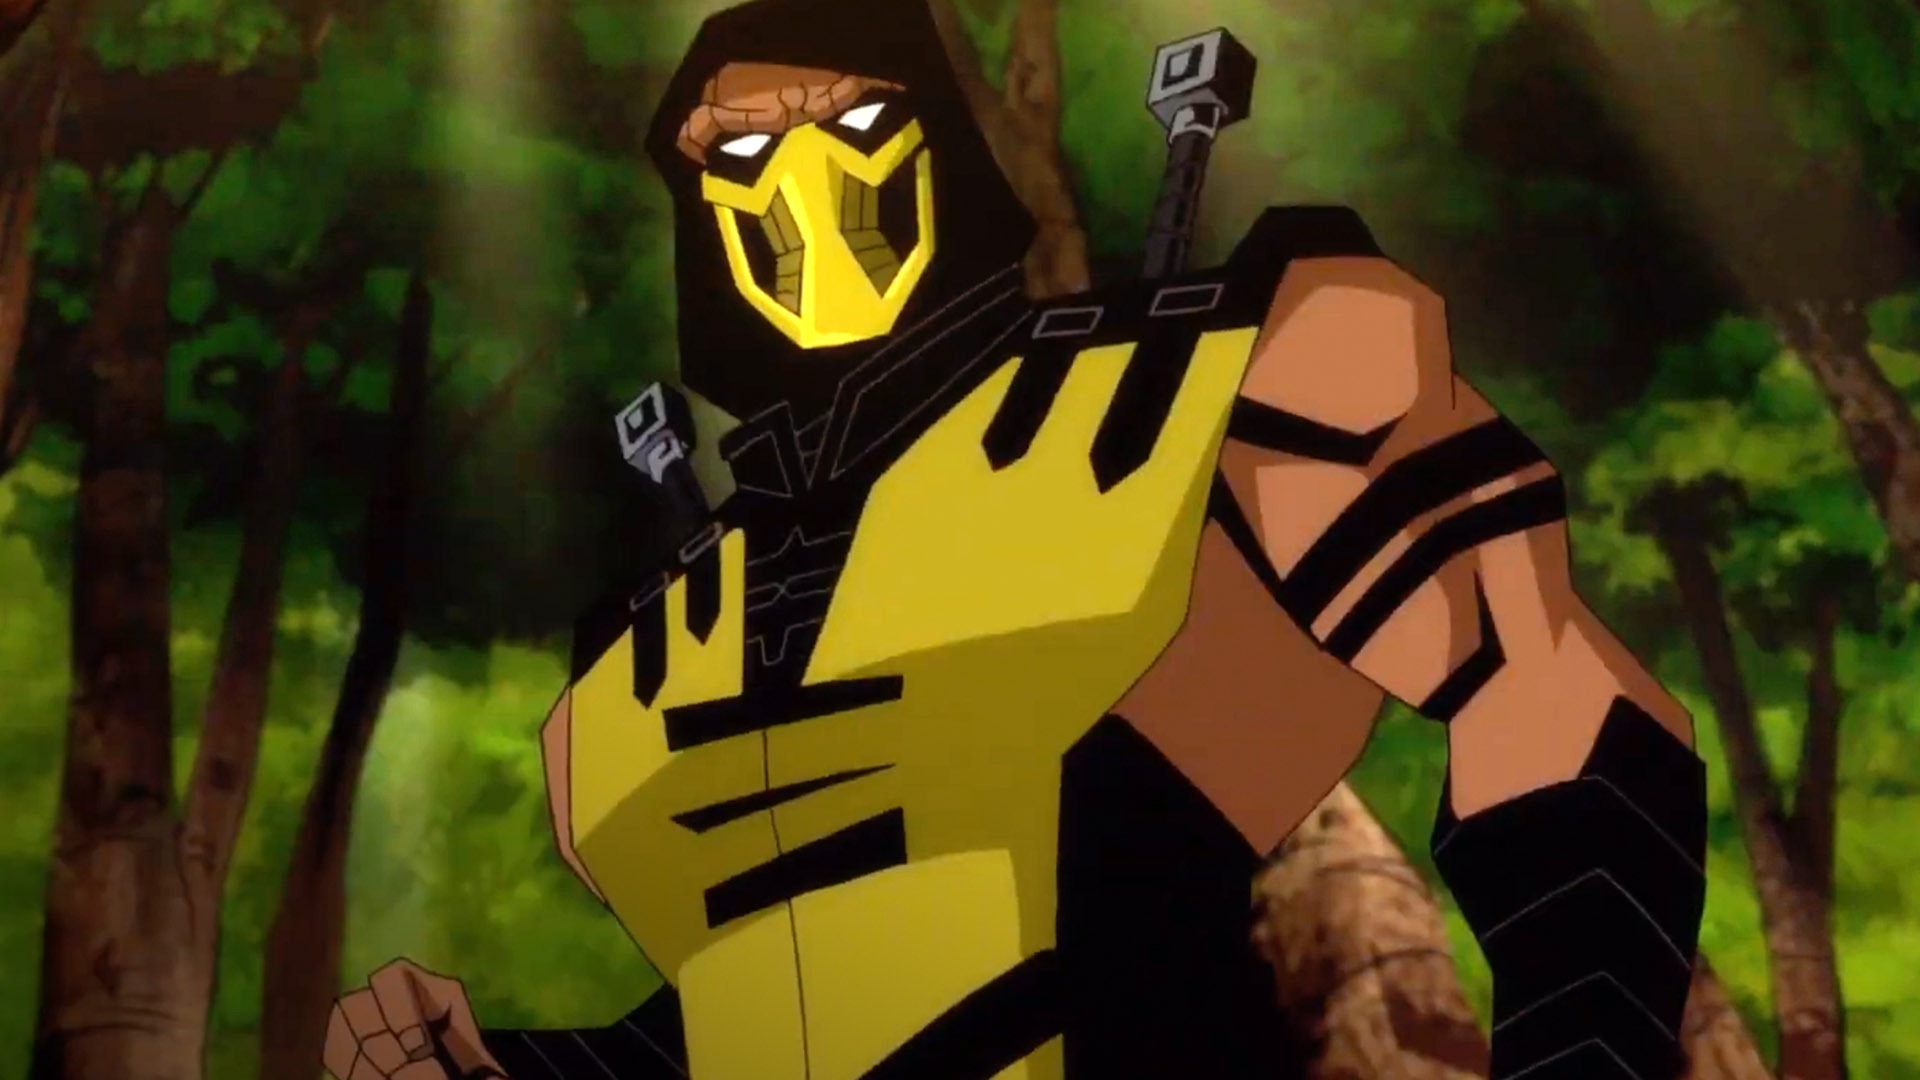 Mortal Kombat animated film gets a bloodsoaked trailer  release date